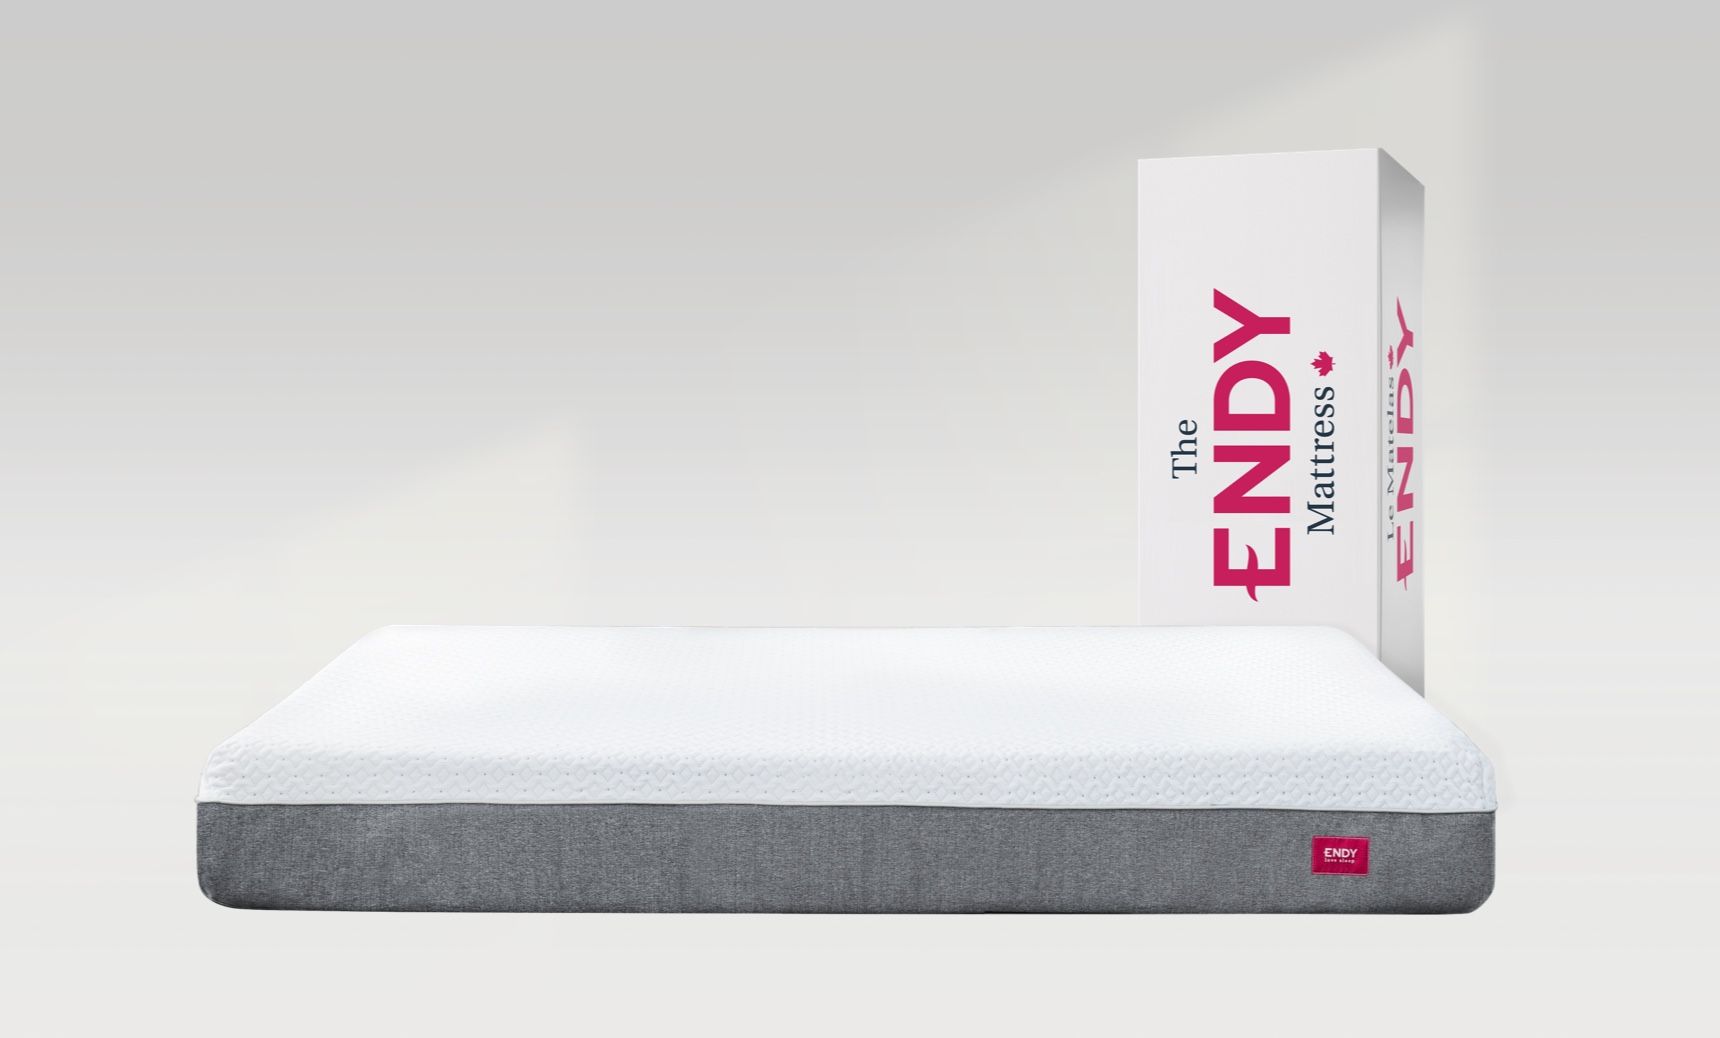 The Endy RV Mattress with it's product packaging